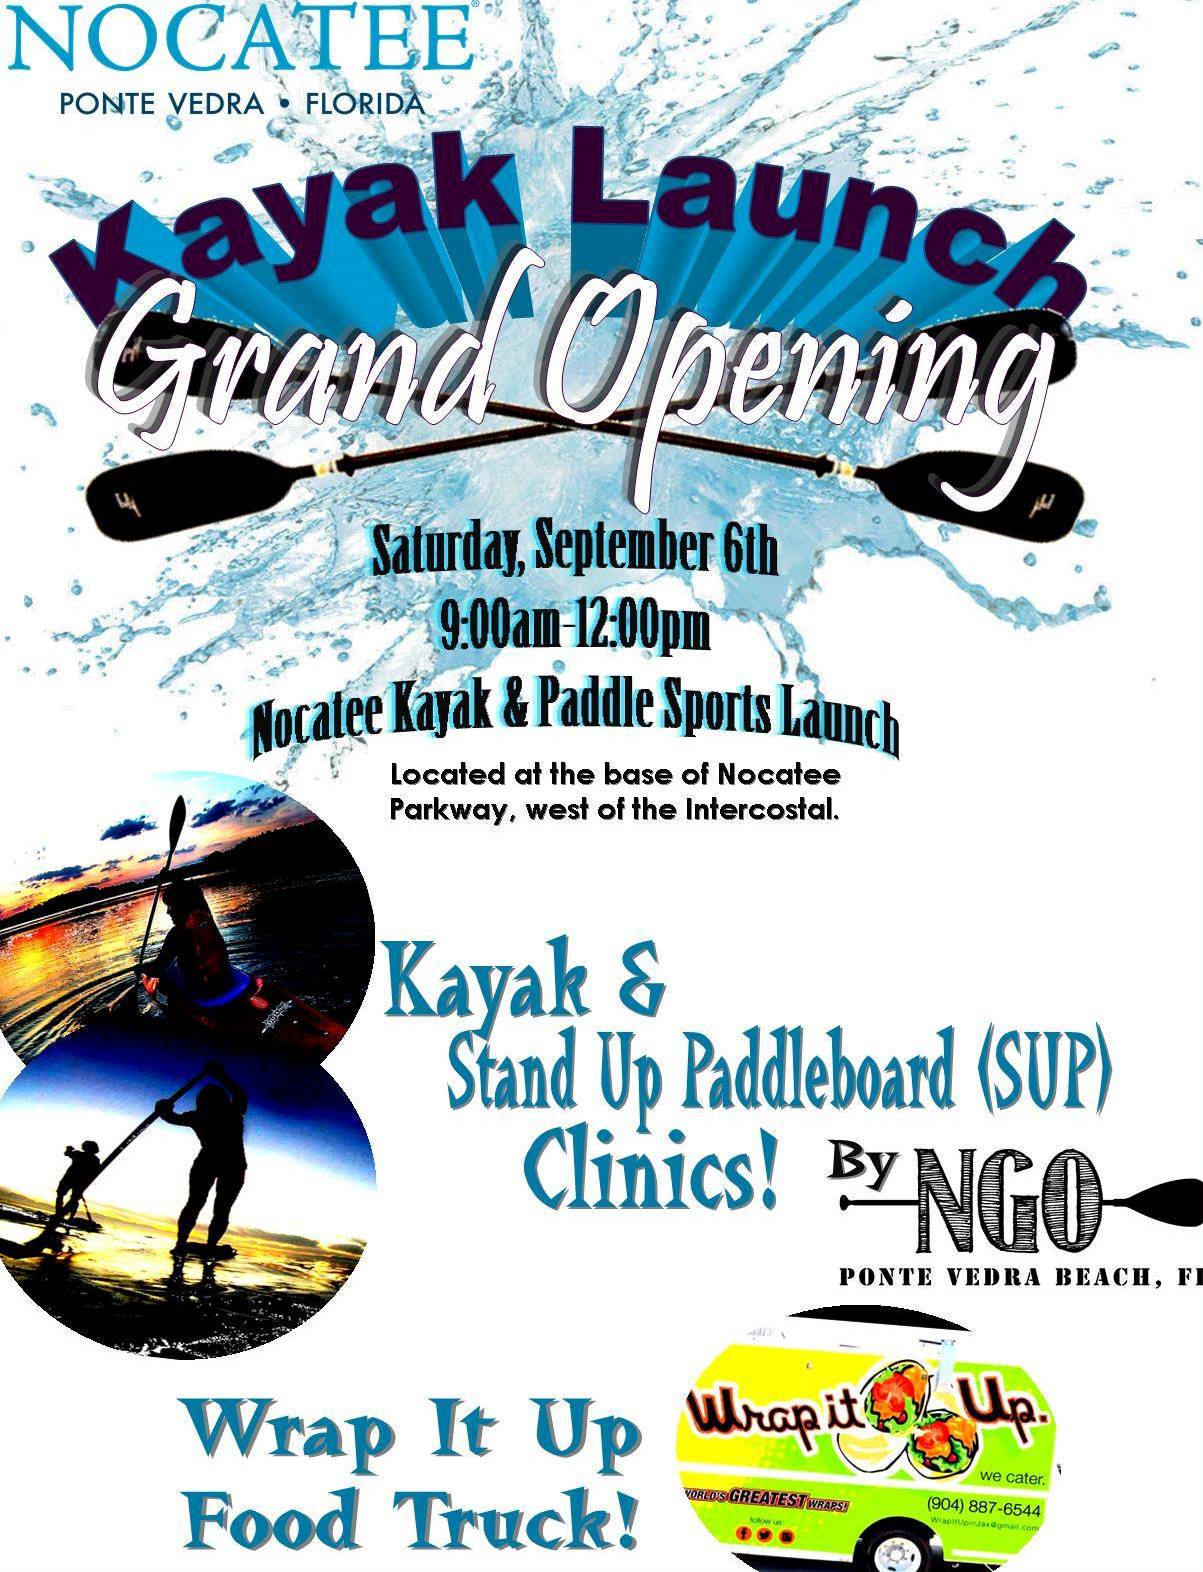 Nocatee Kayak and Paddle Sports Launch Grand Opening Event